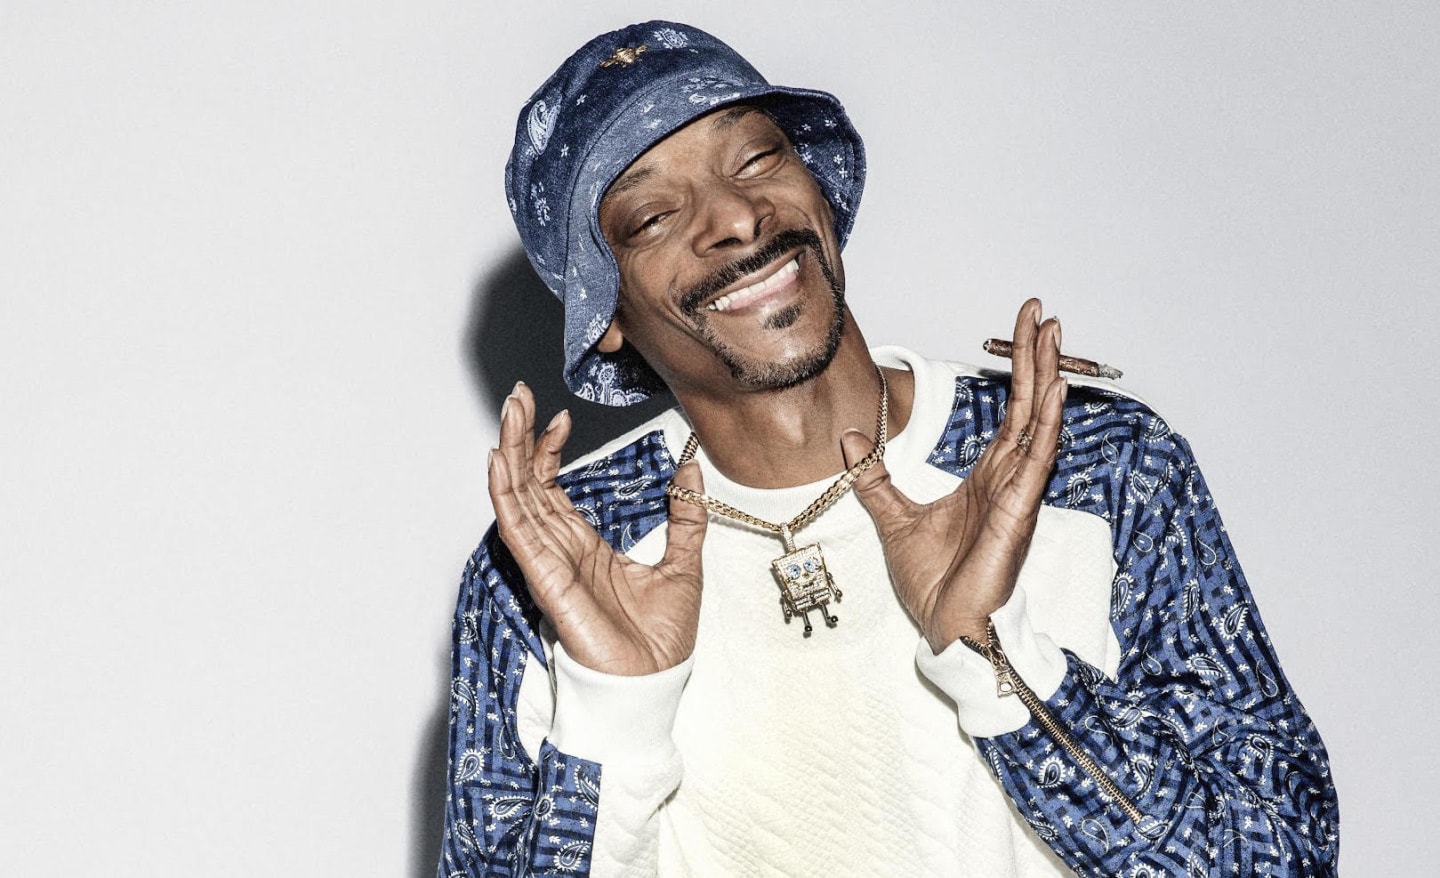 snoop dogg Rise to Fame and Iconic Debut